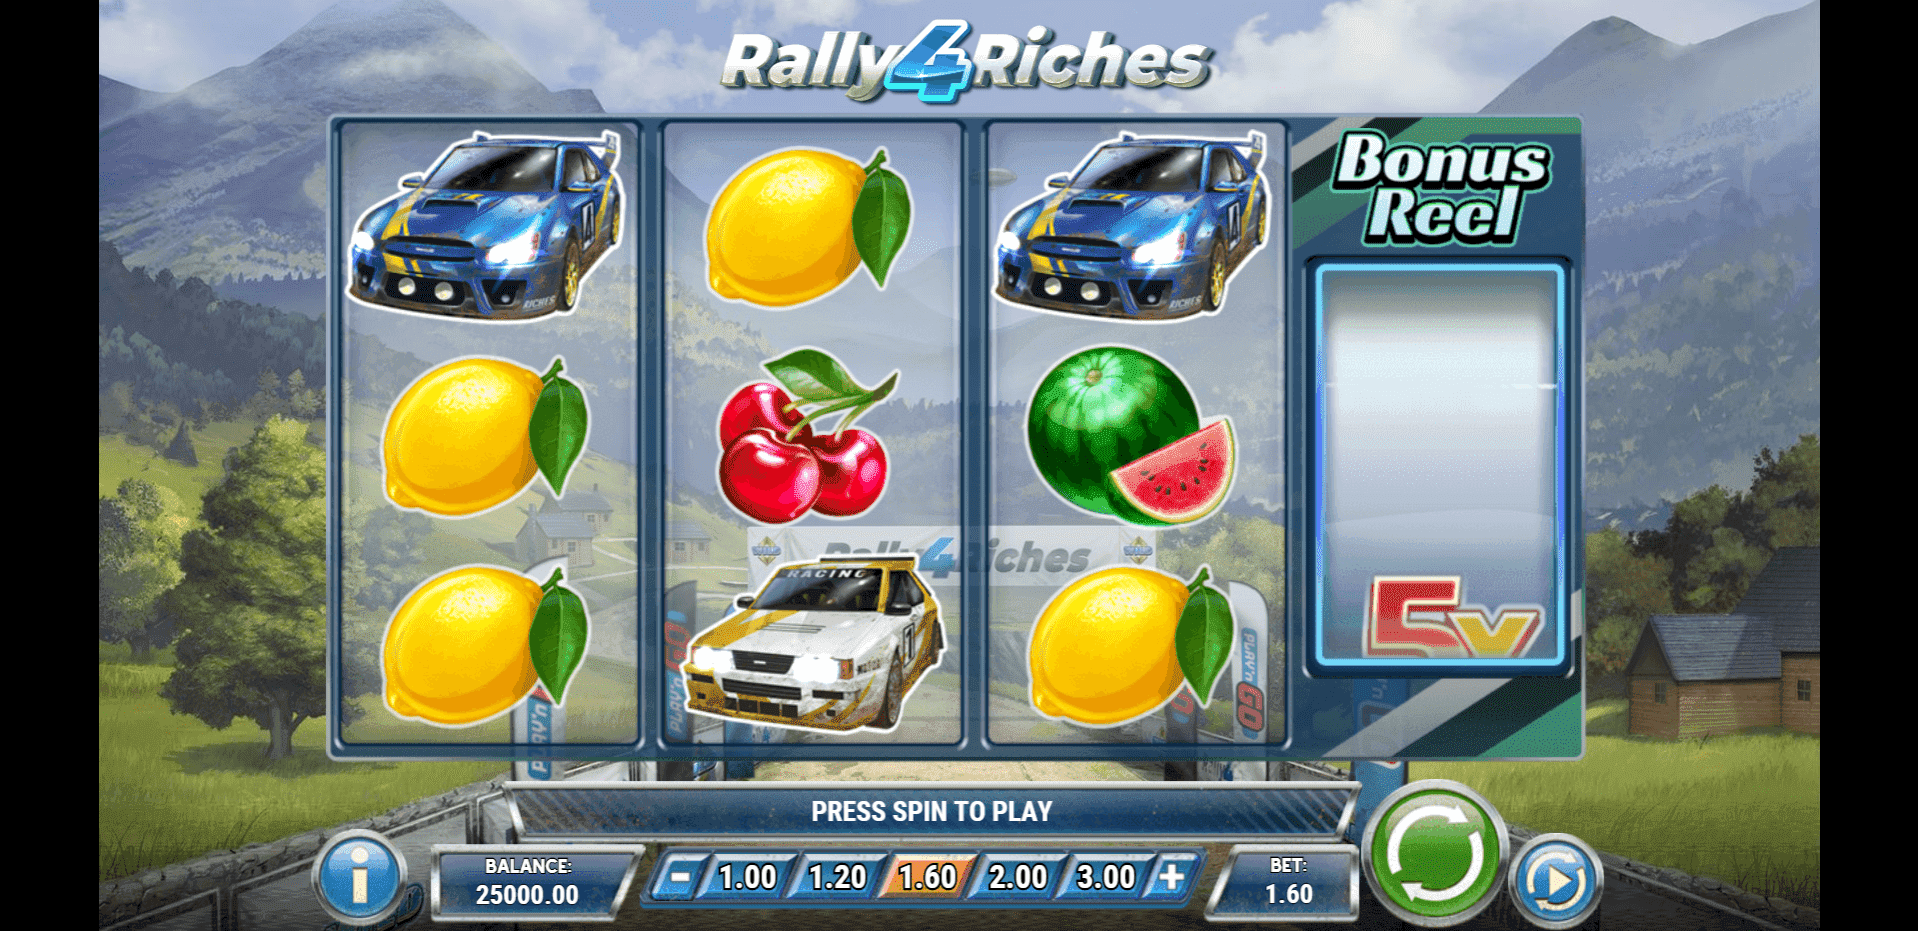 Rally 4 Riches slot play free